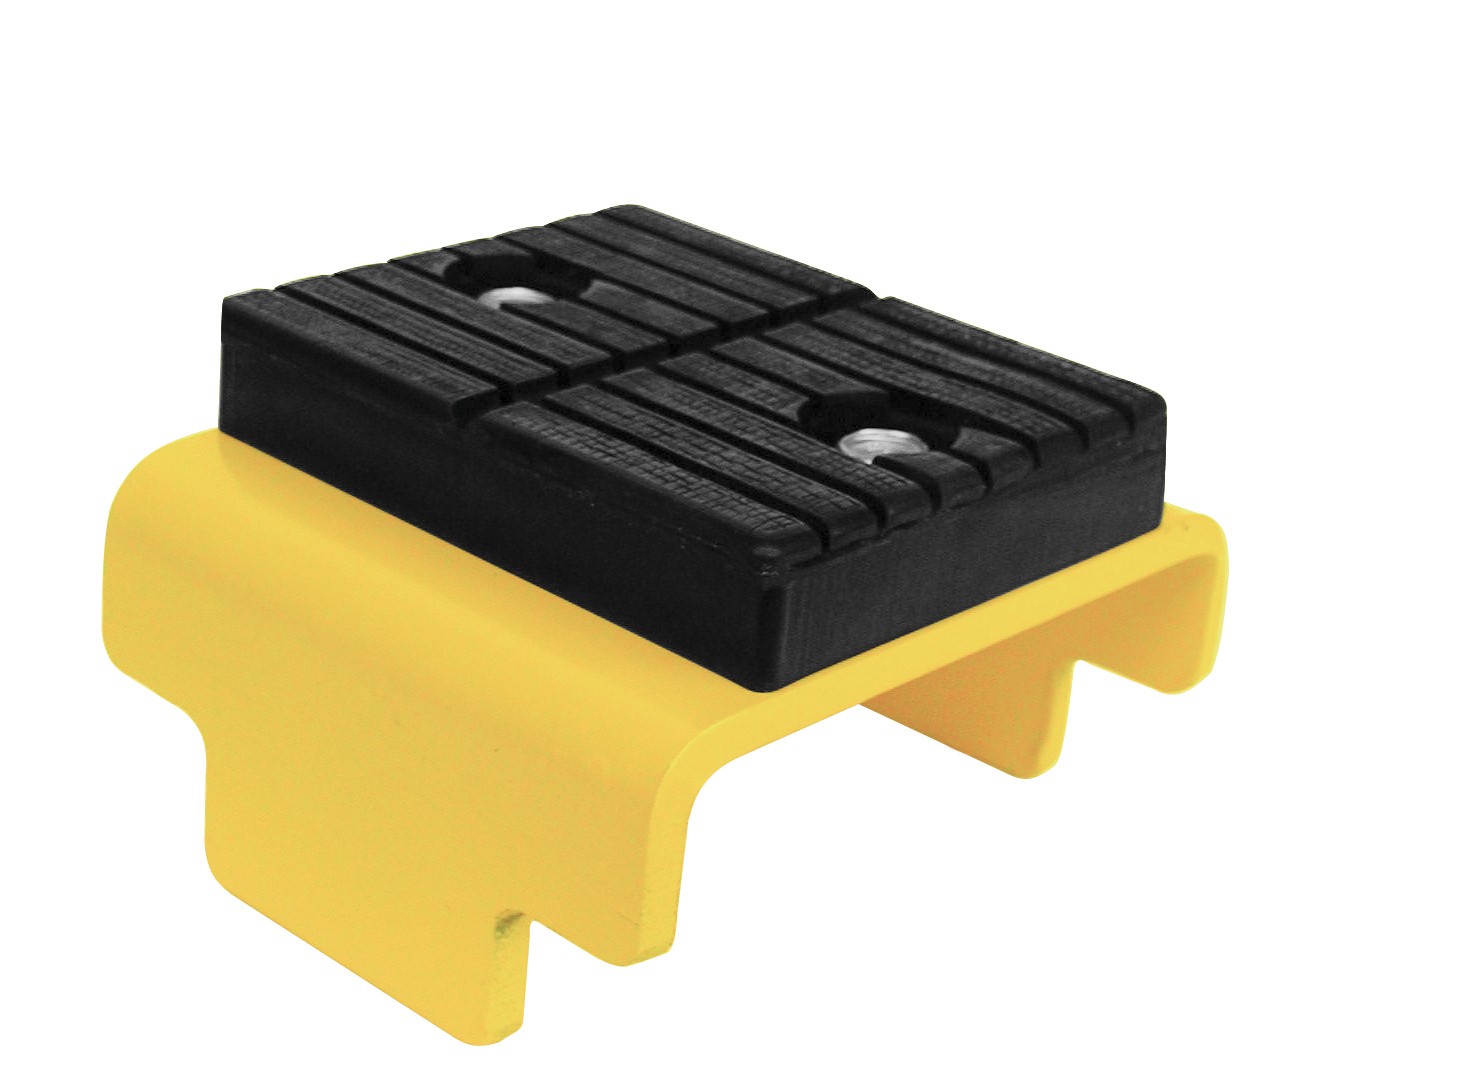 Challenger offers a range of vehicle-specific adapters and footpads, including luxury car adapters, frame-engaging truck lift adapters, cradle adapters and pin adapters for sprinter cargo vans.